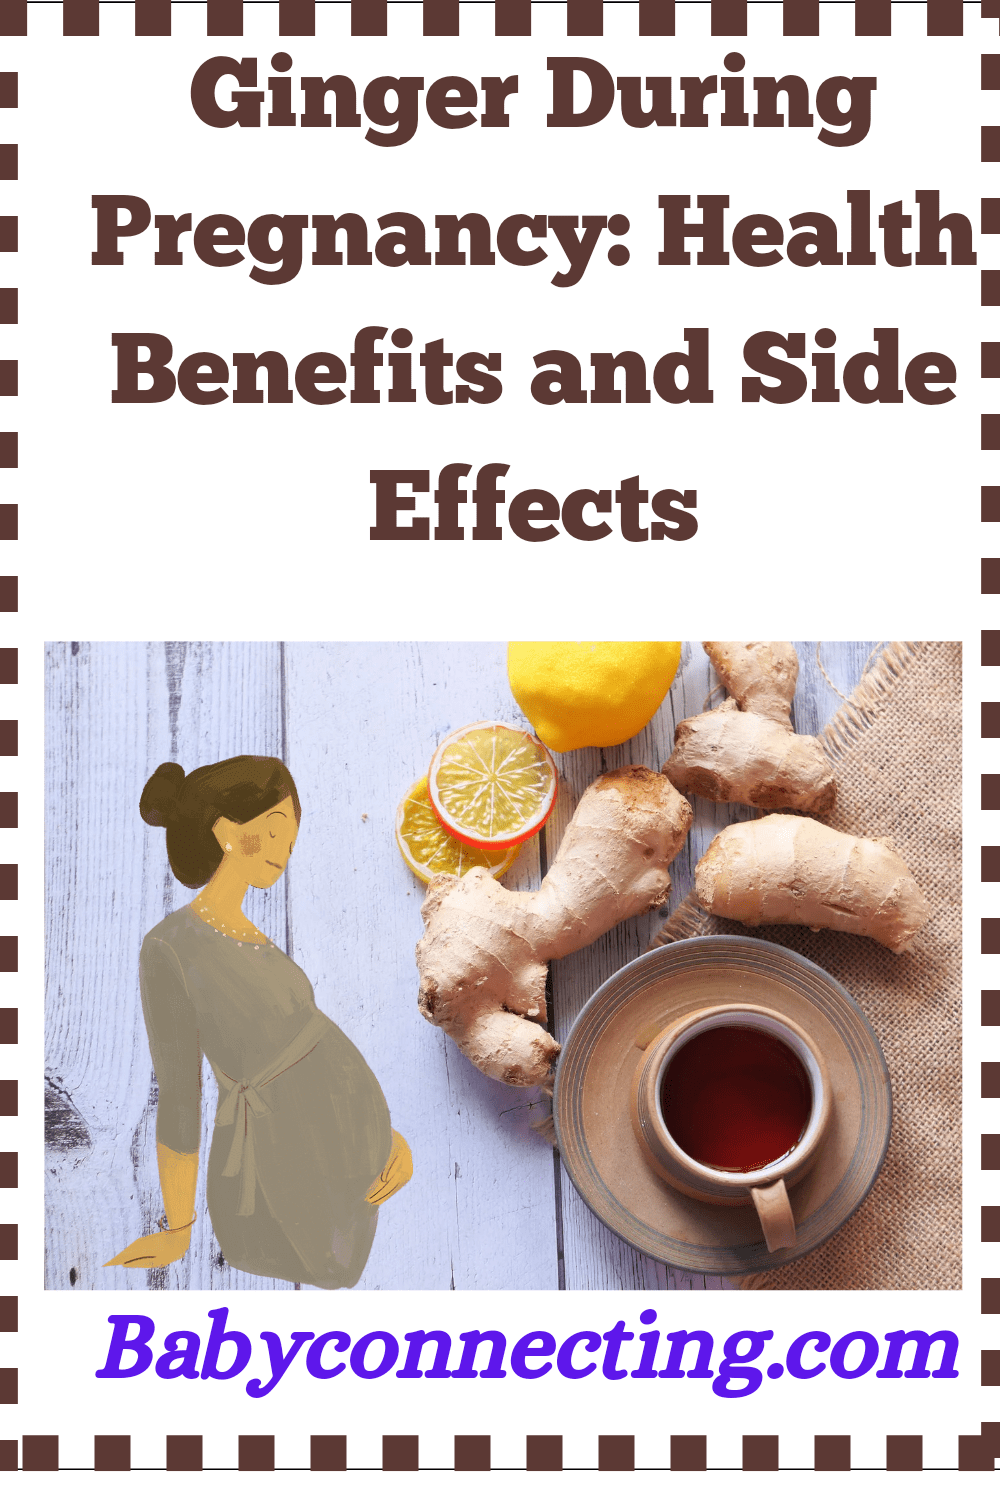 Ginger During Pregnancy: Health Benefits and Side Effects